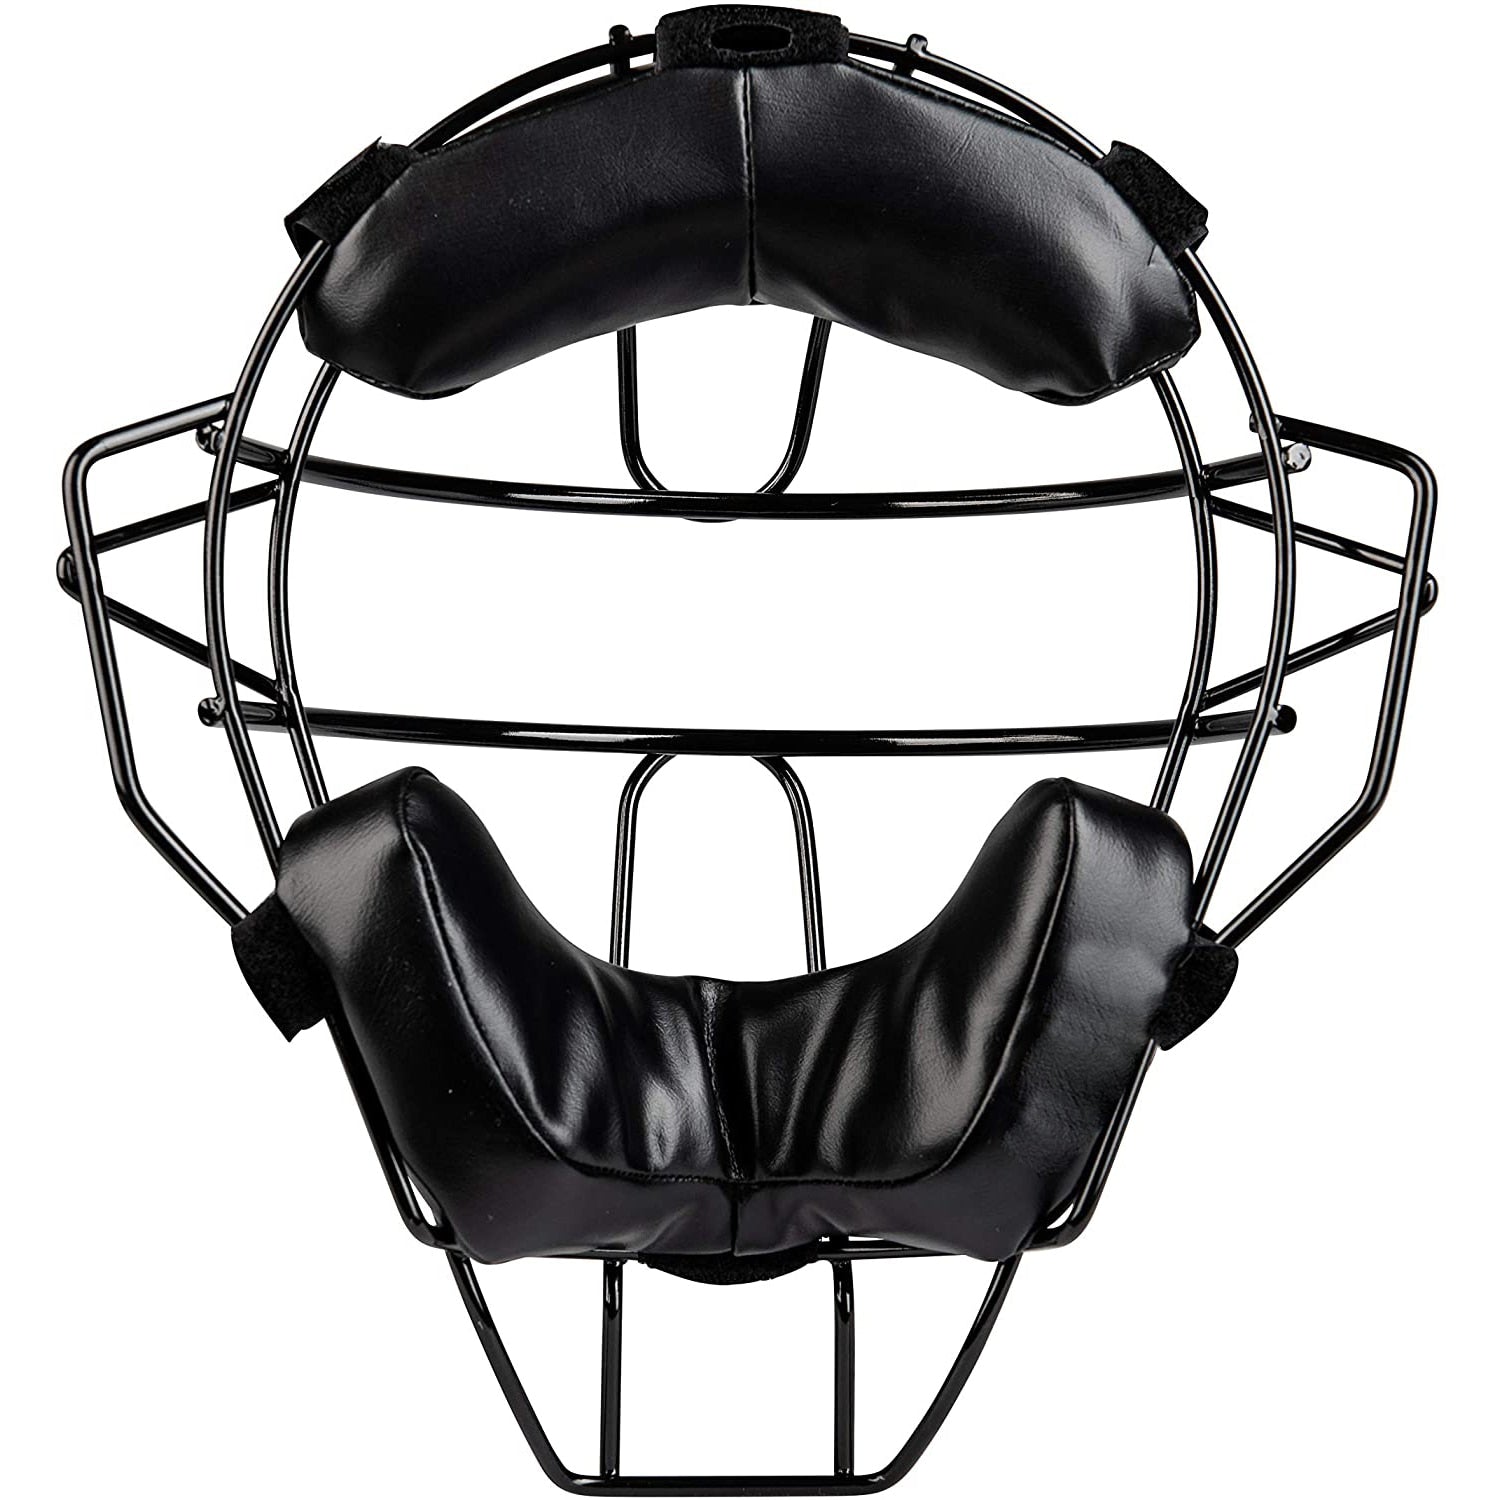 Baseball Protective Extended Children Mask Adult Classic Softball Steel Frame With PU Leather Catcher Head Protection Equipment